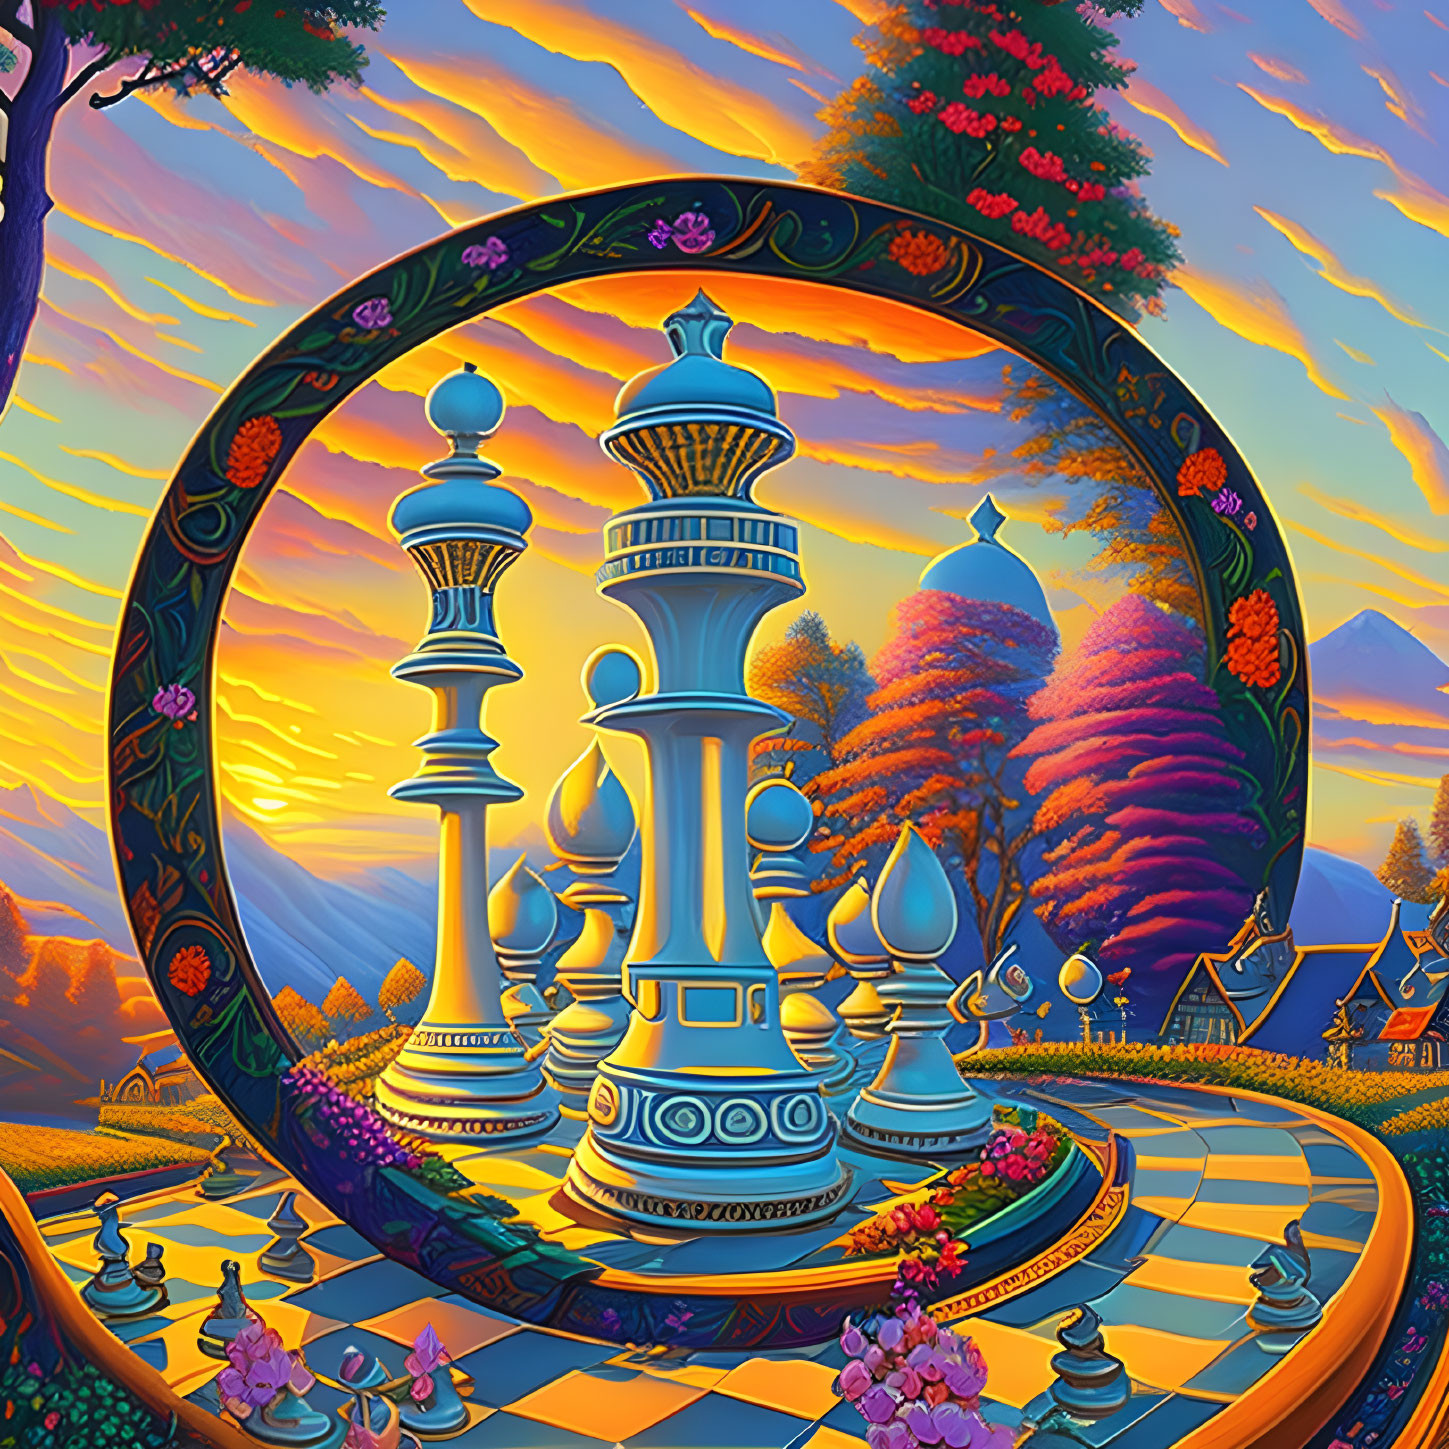 Colorful oversized chess pieces on whimsical landscape background